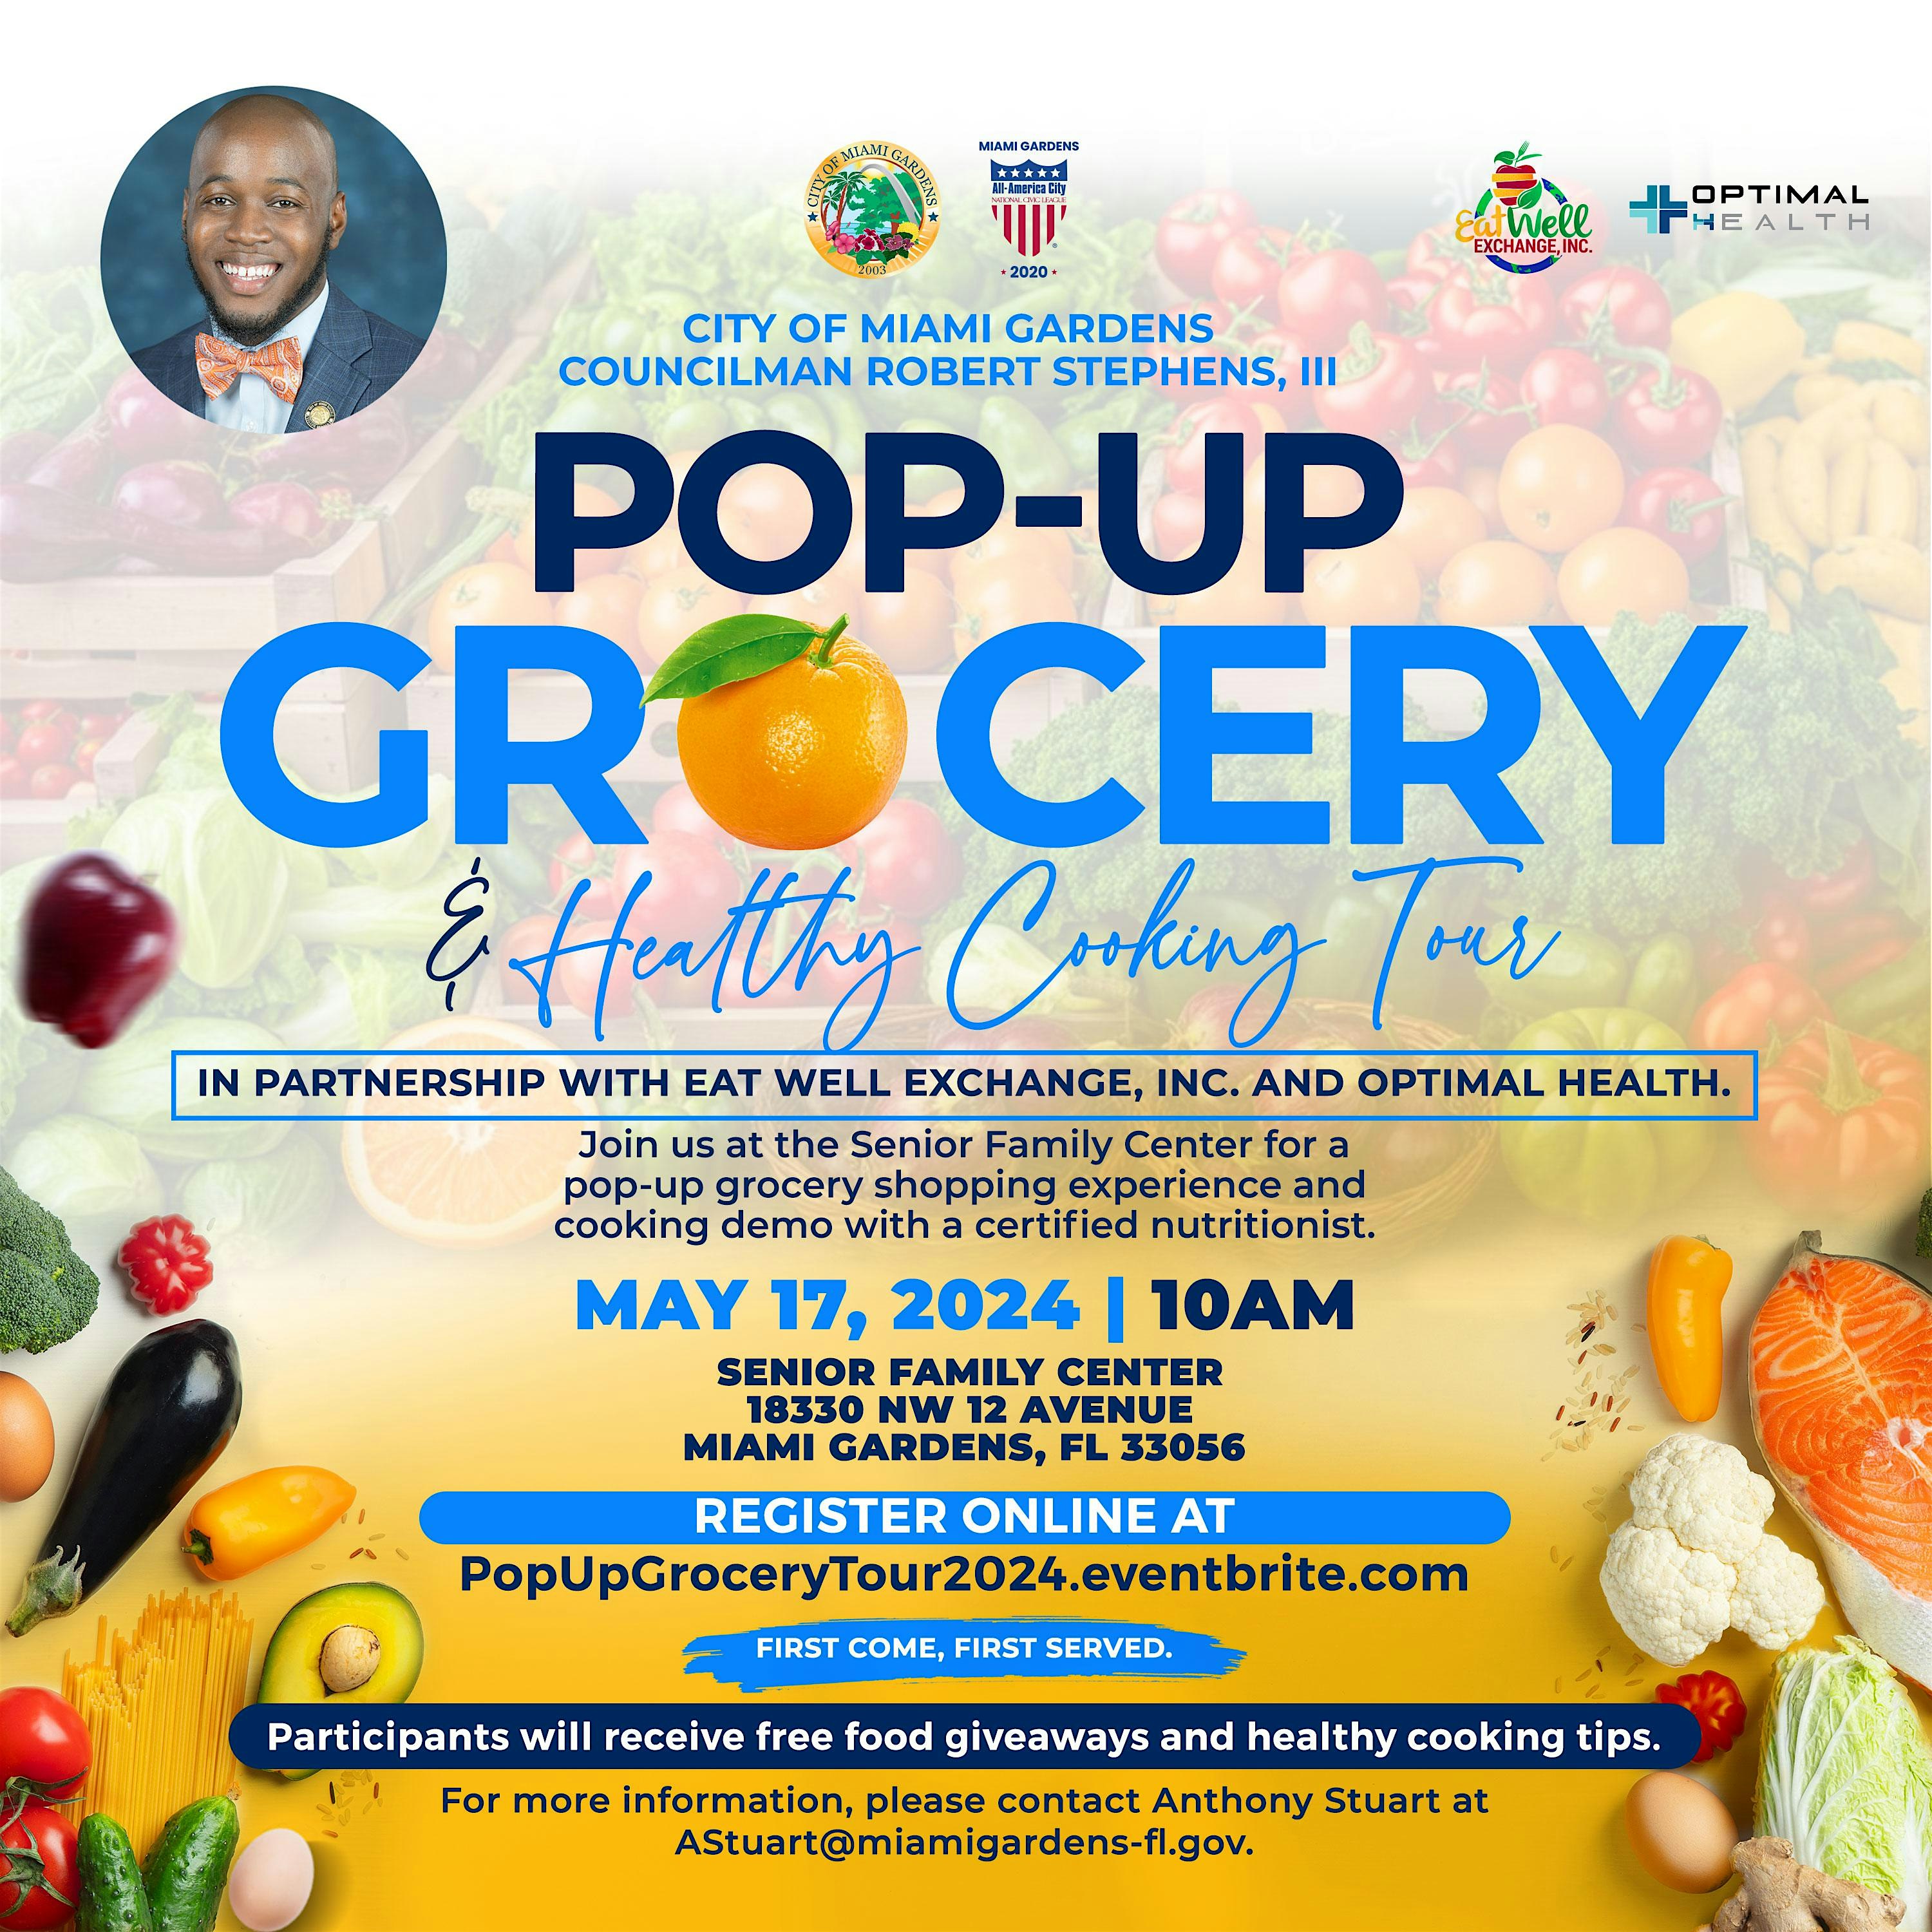 Pop-Up Grocery & Healthy Cooking Tour